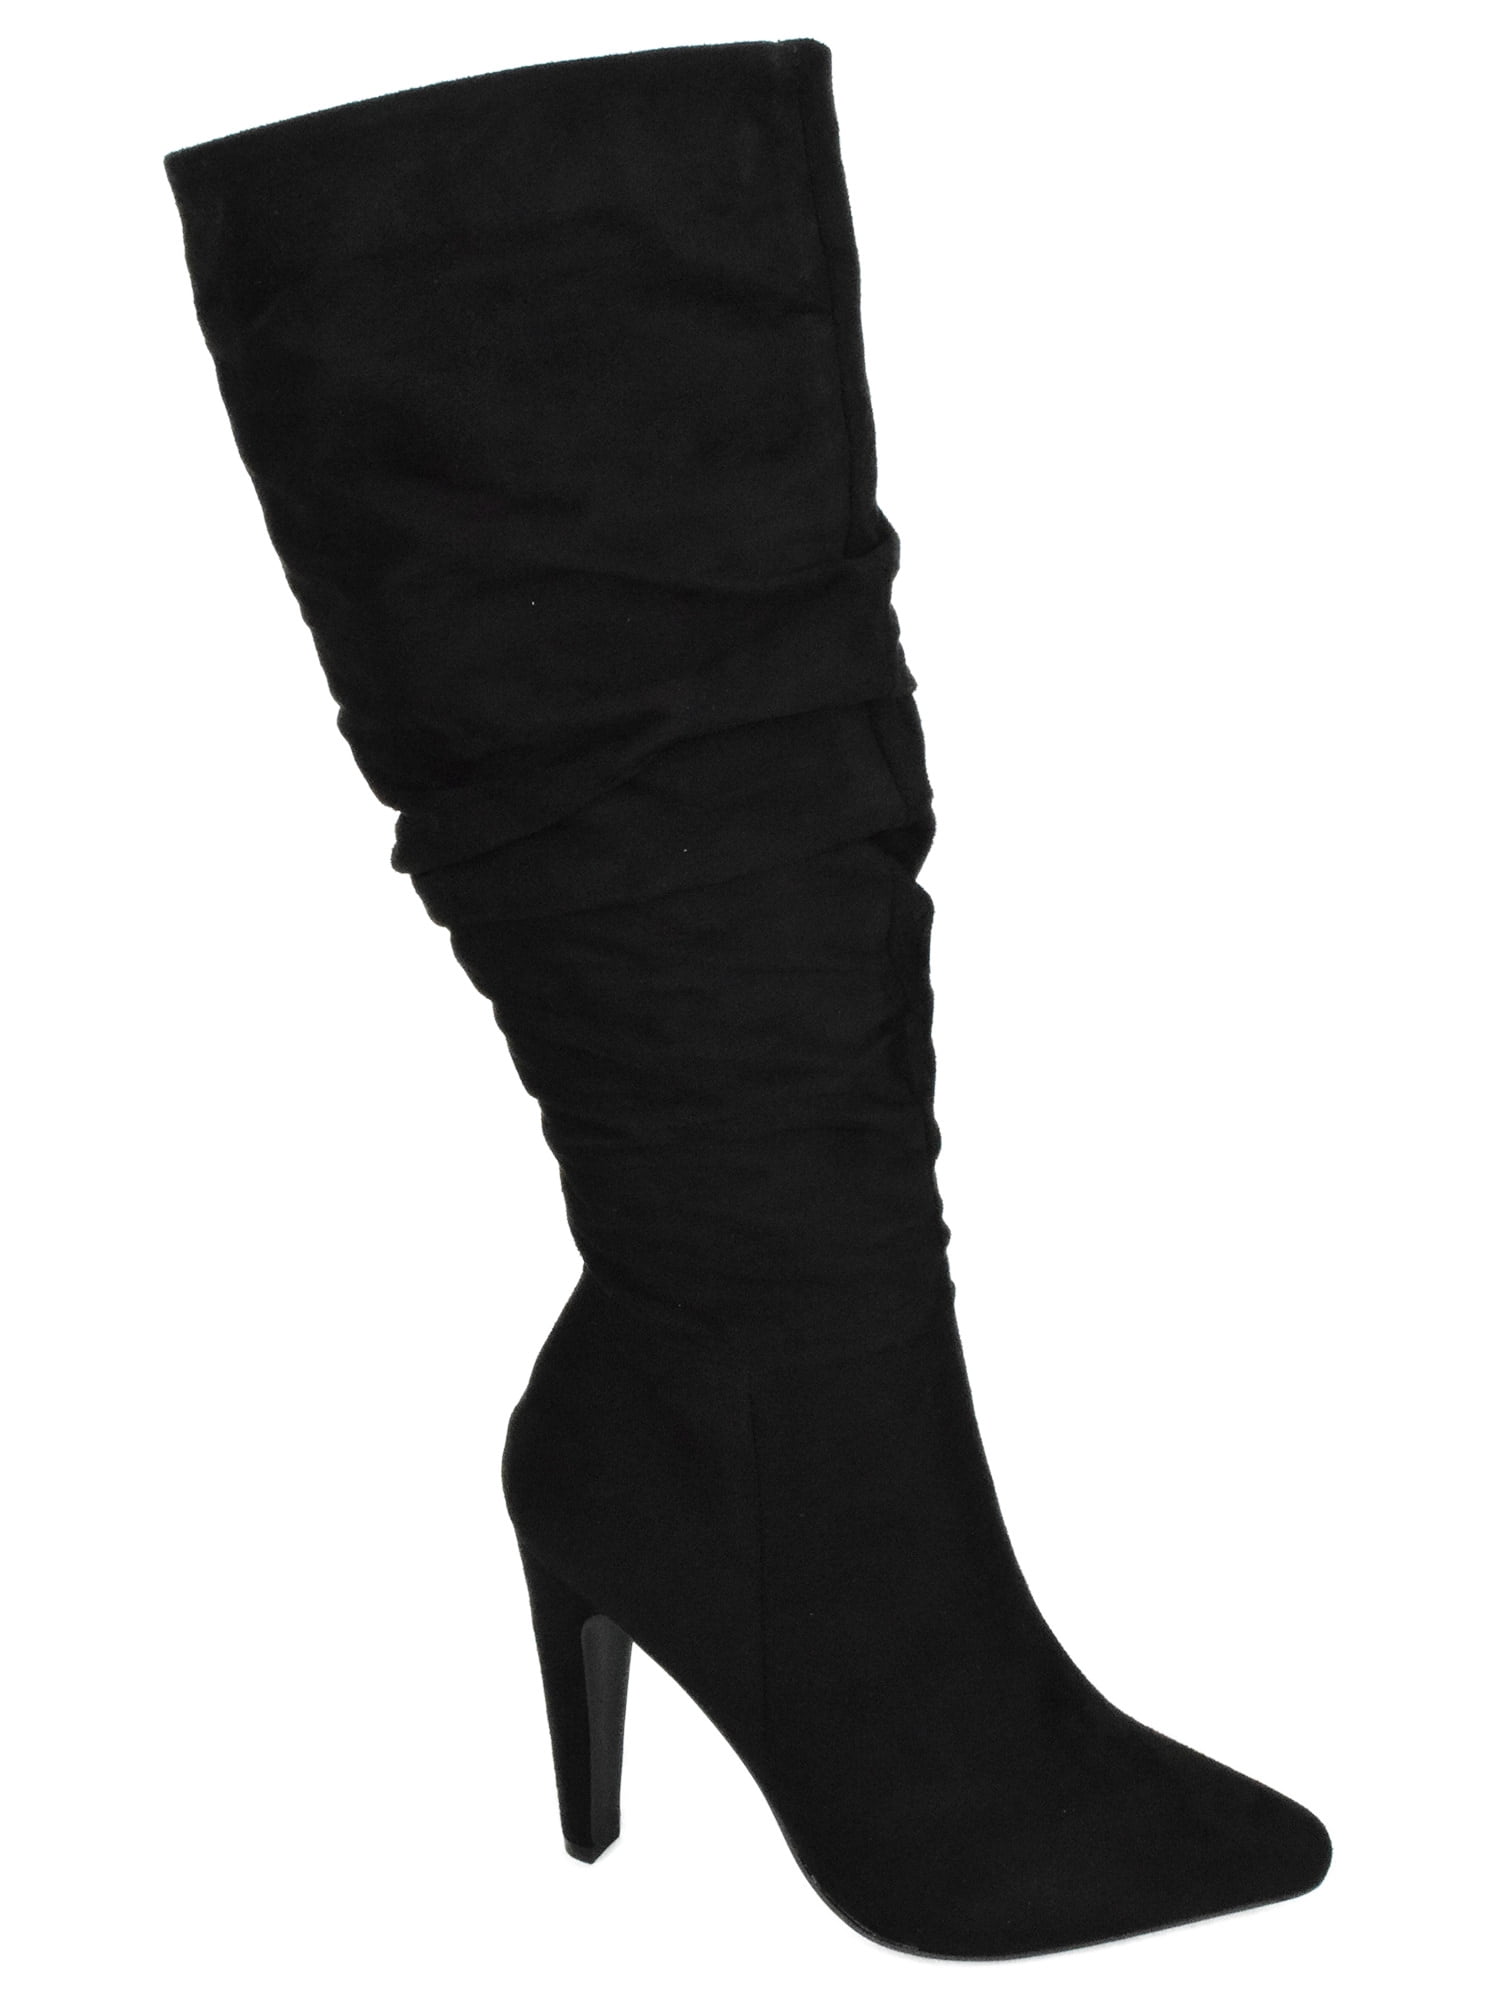 NEW WOMEN'S POINTY TOE STRAPPY BACK SUEDE OVER THE KNEE HIGH HEEL DRESS BOOT 